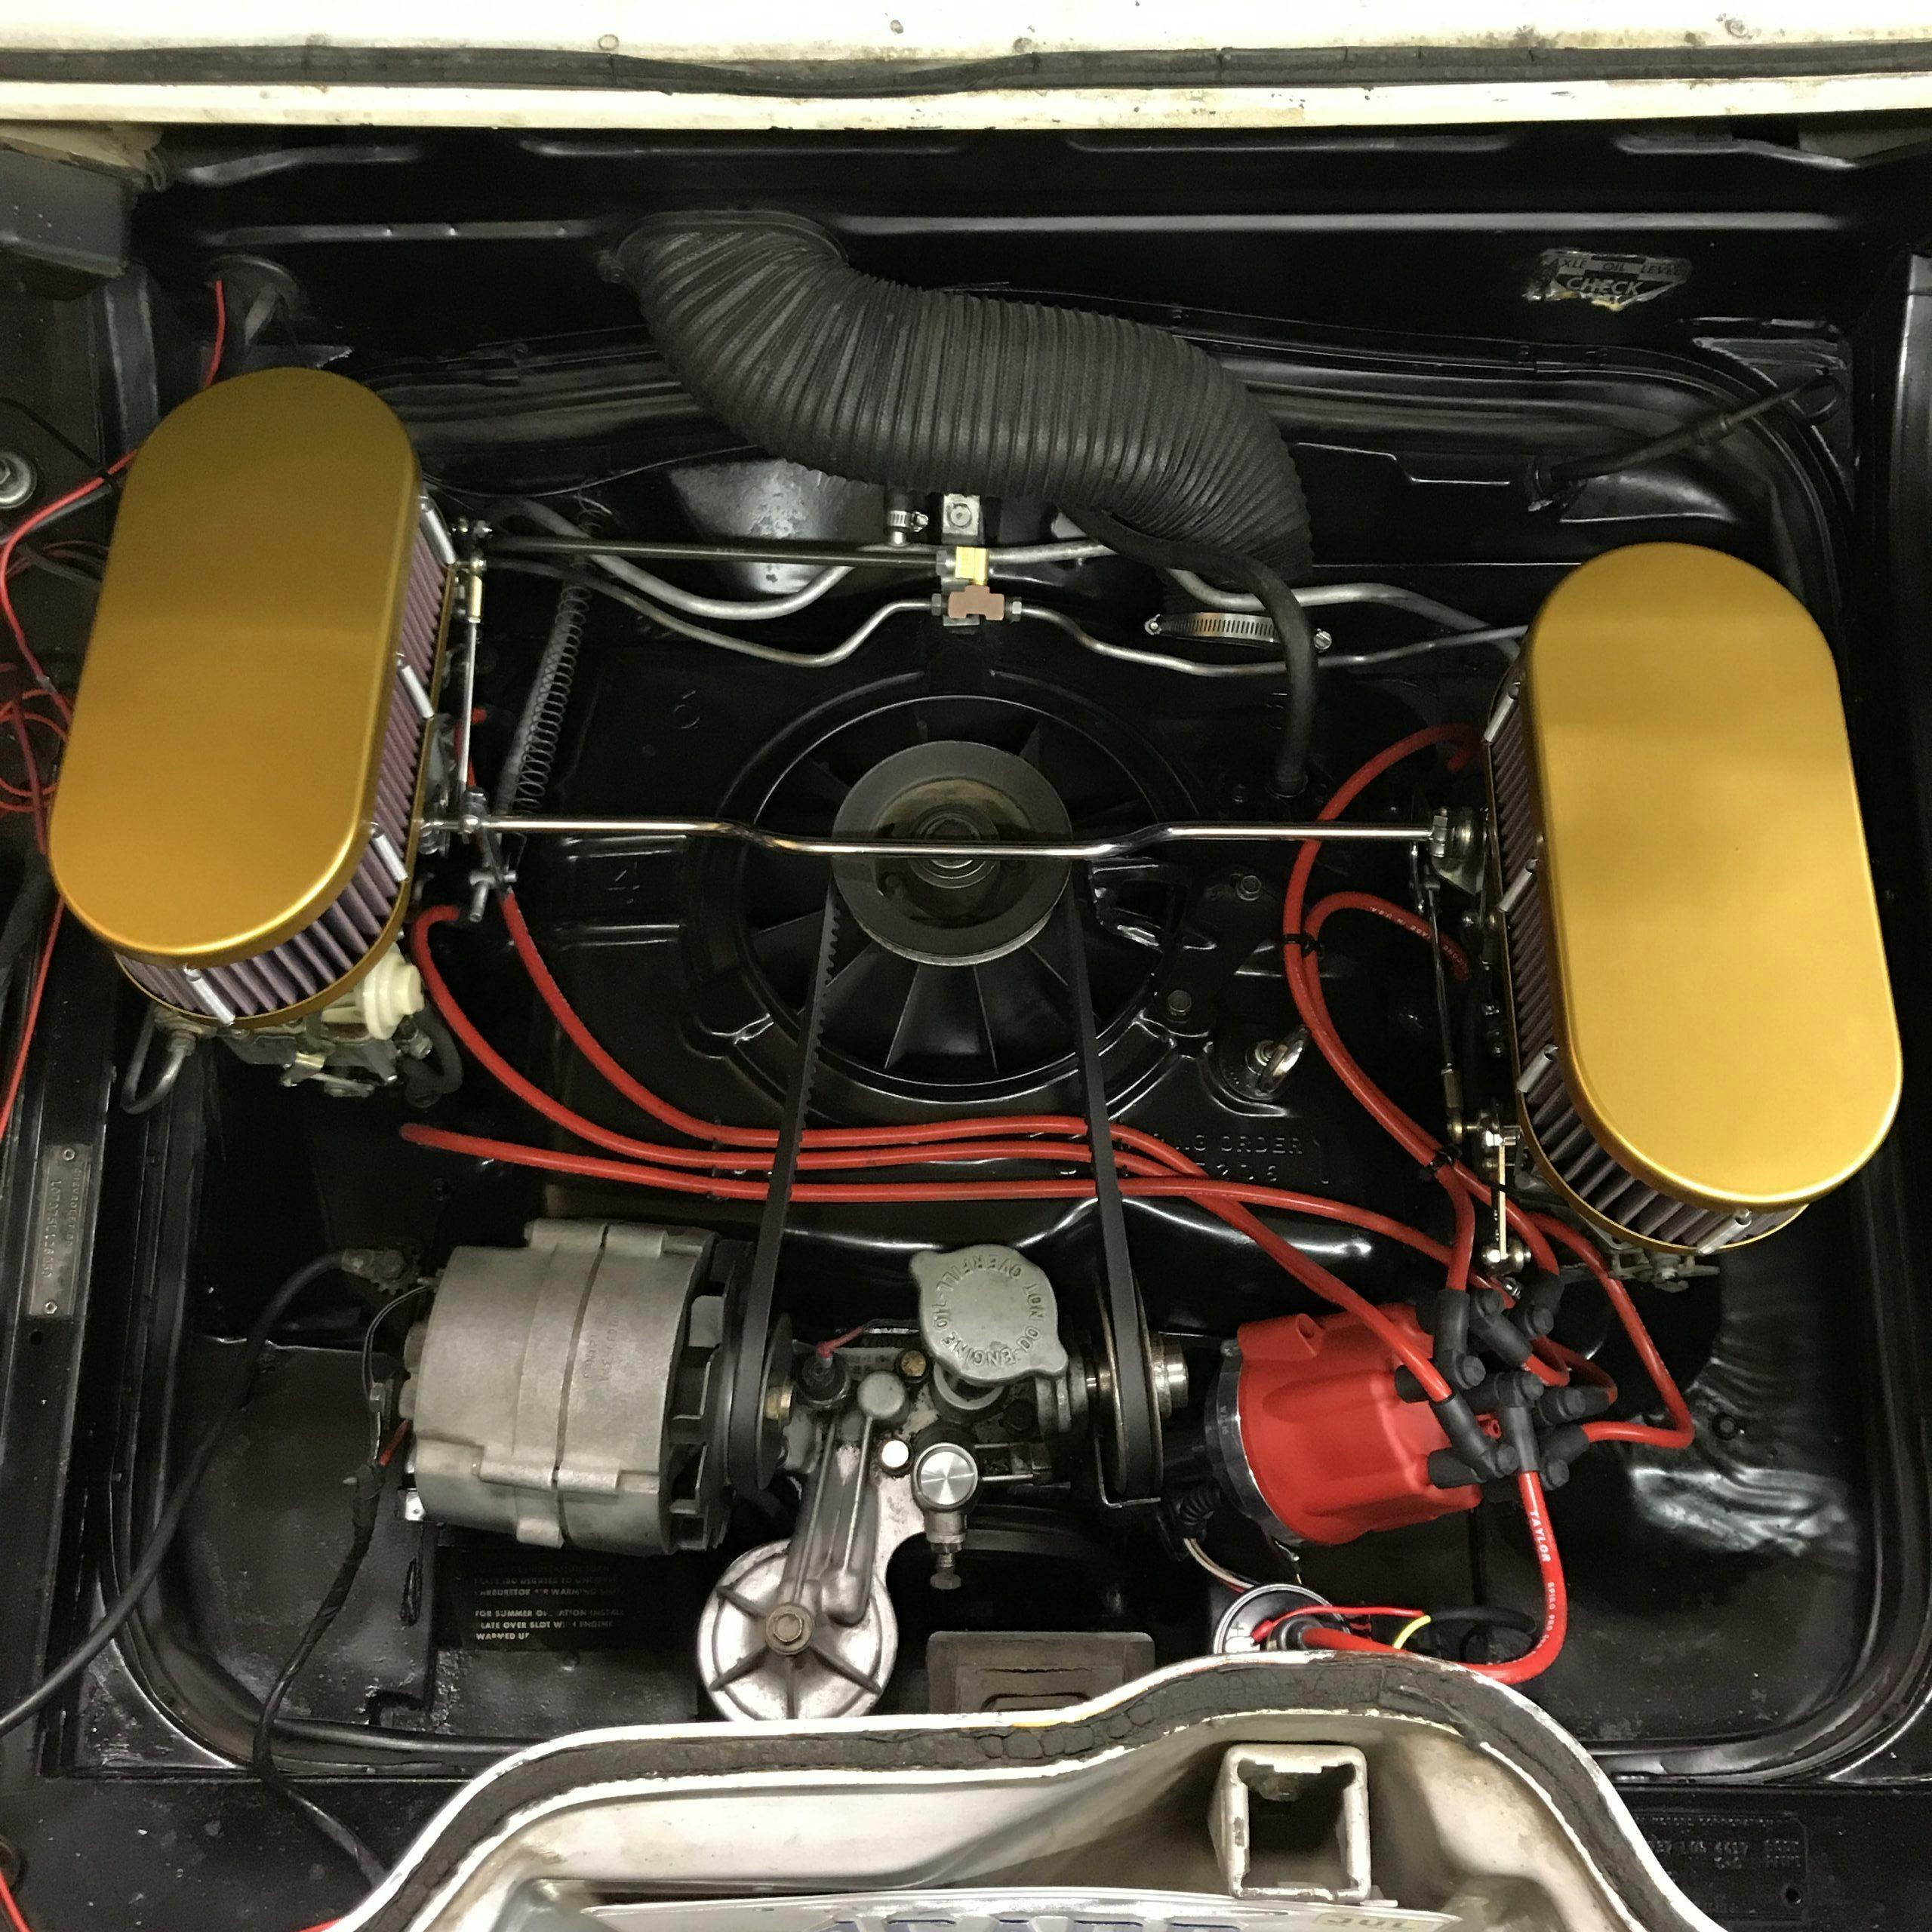 How To Clean Engine Parts 3 dos and don'ts for cleaning your engine compartment - Hagerty Media